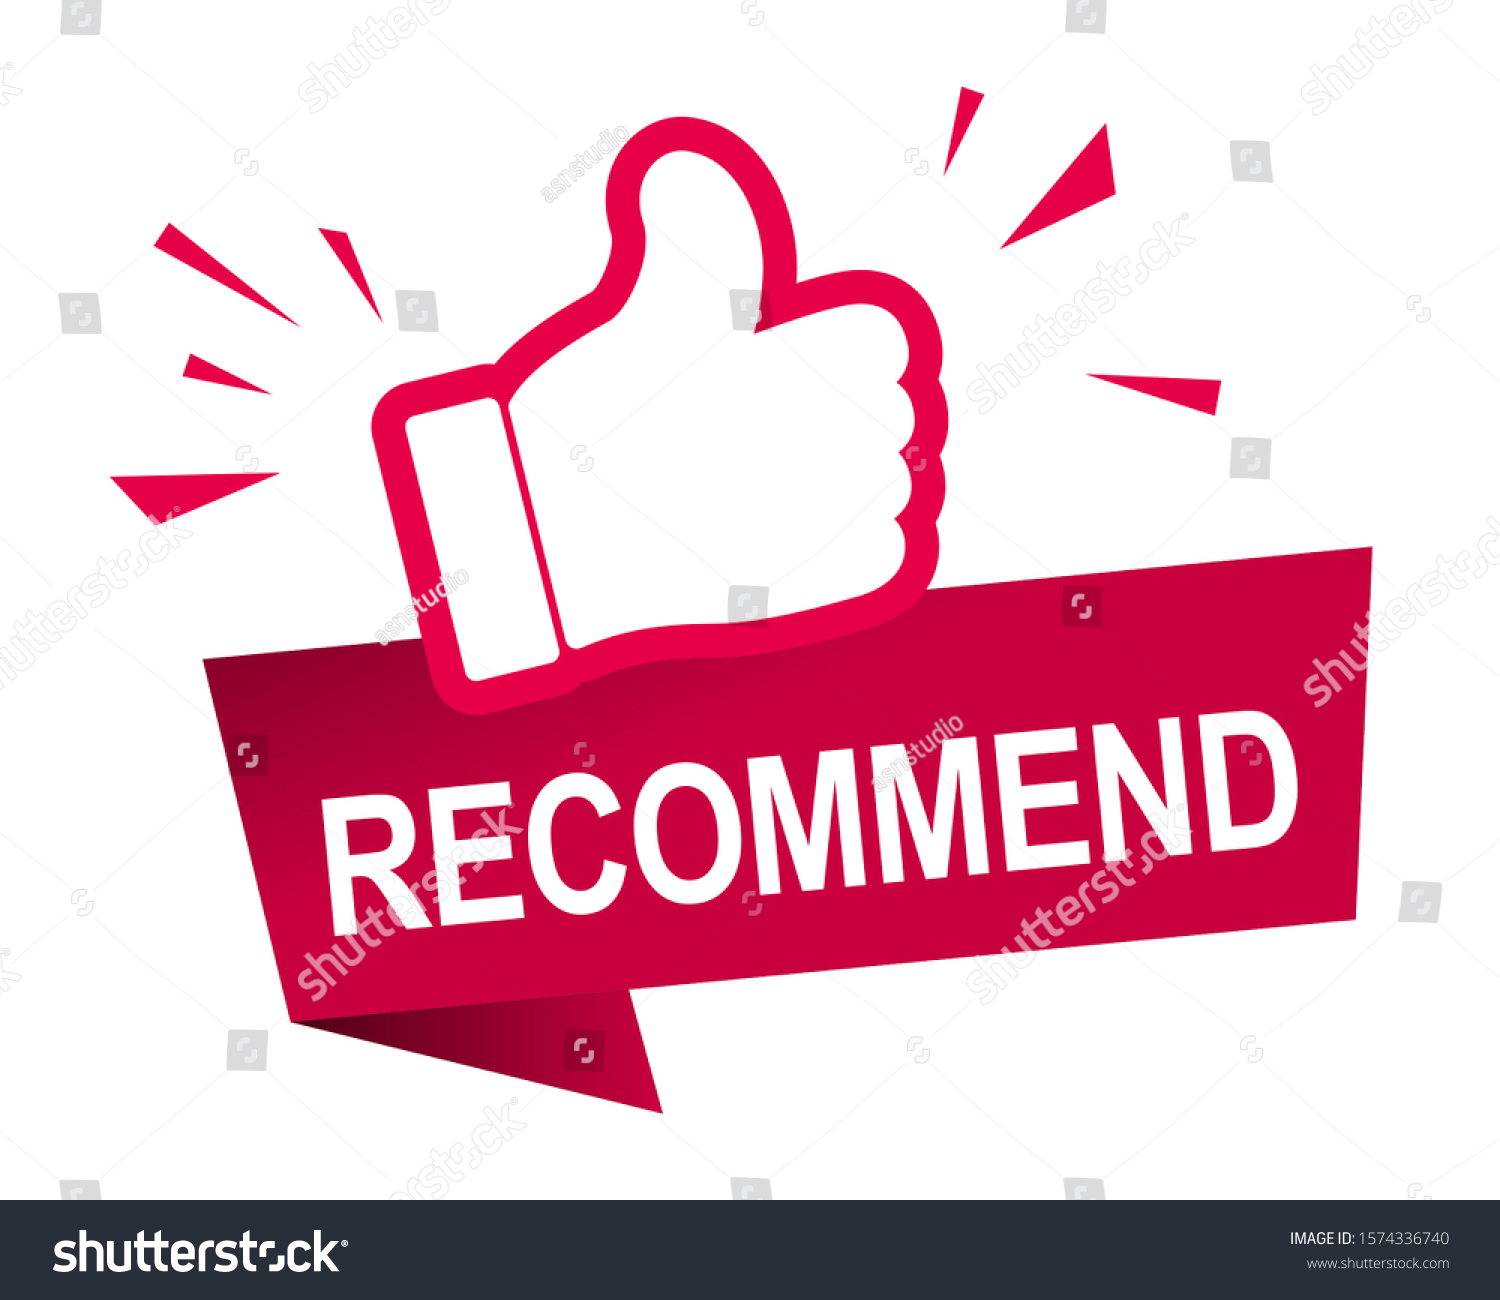 Recommend icon design. Red label recommend with thumb up icon in trendy flat style design. Vector illustration. #1574336740